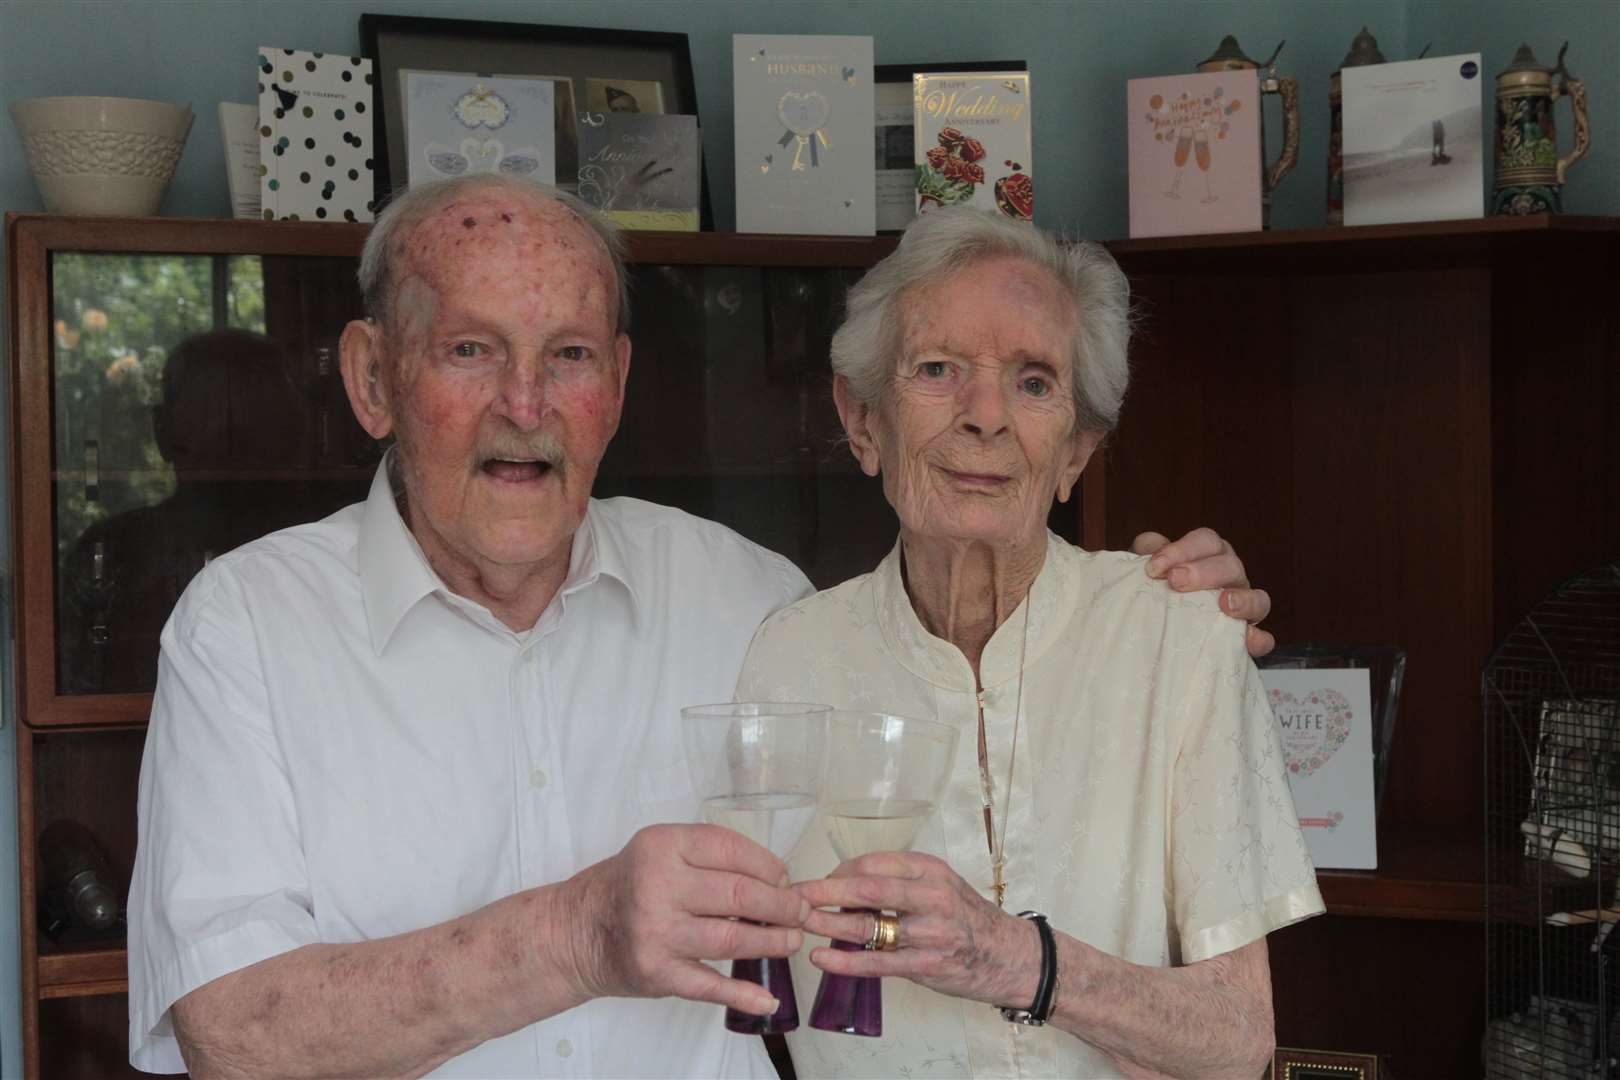 Charles Prior, 94 with his wife, Jacquilne, 93 (corr) celebrate their 73rd Wedding Anniversary at their home in Hawley. Picture by: John Westhrop (2242570)